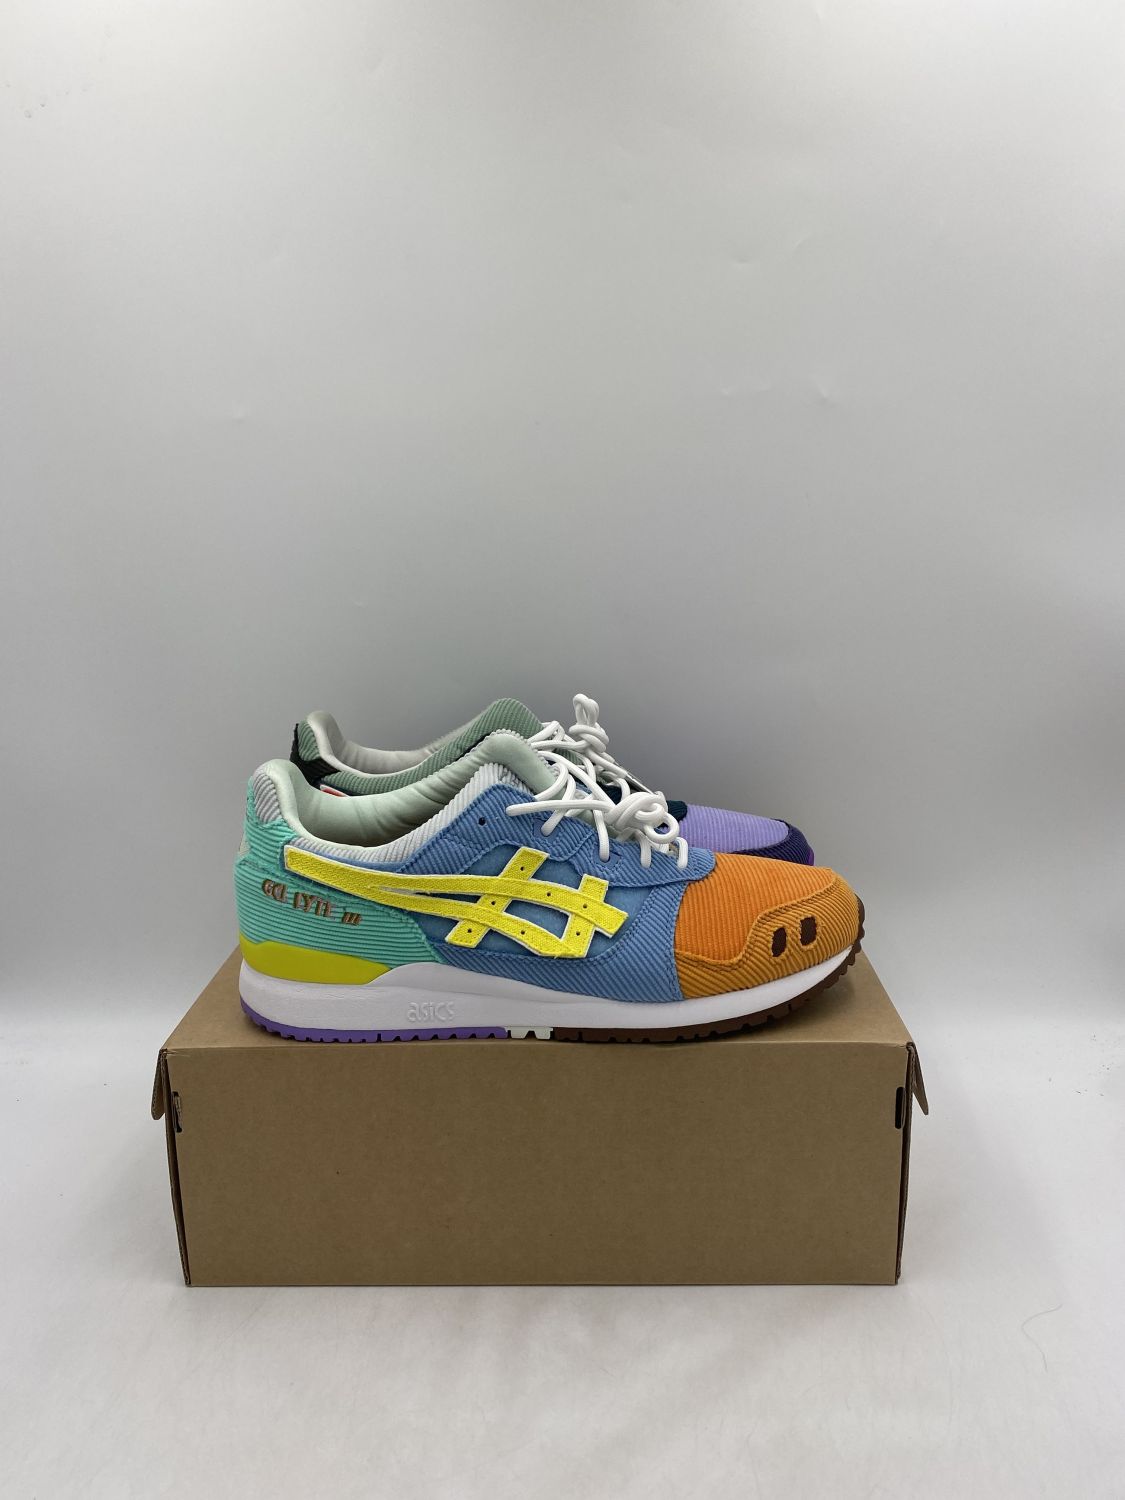 ASICS Gel-Lyte III Sean Wotherspoon X Atmos | AfterMarket